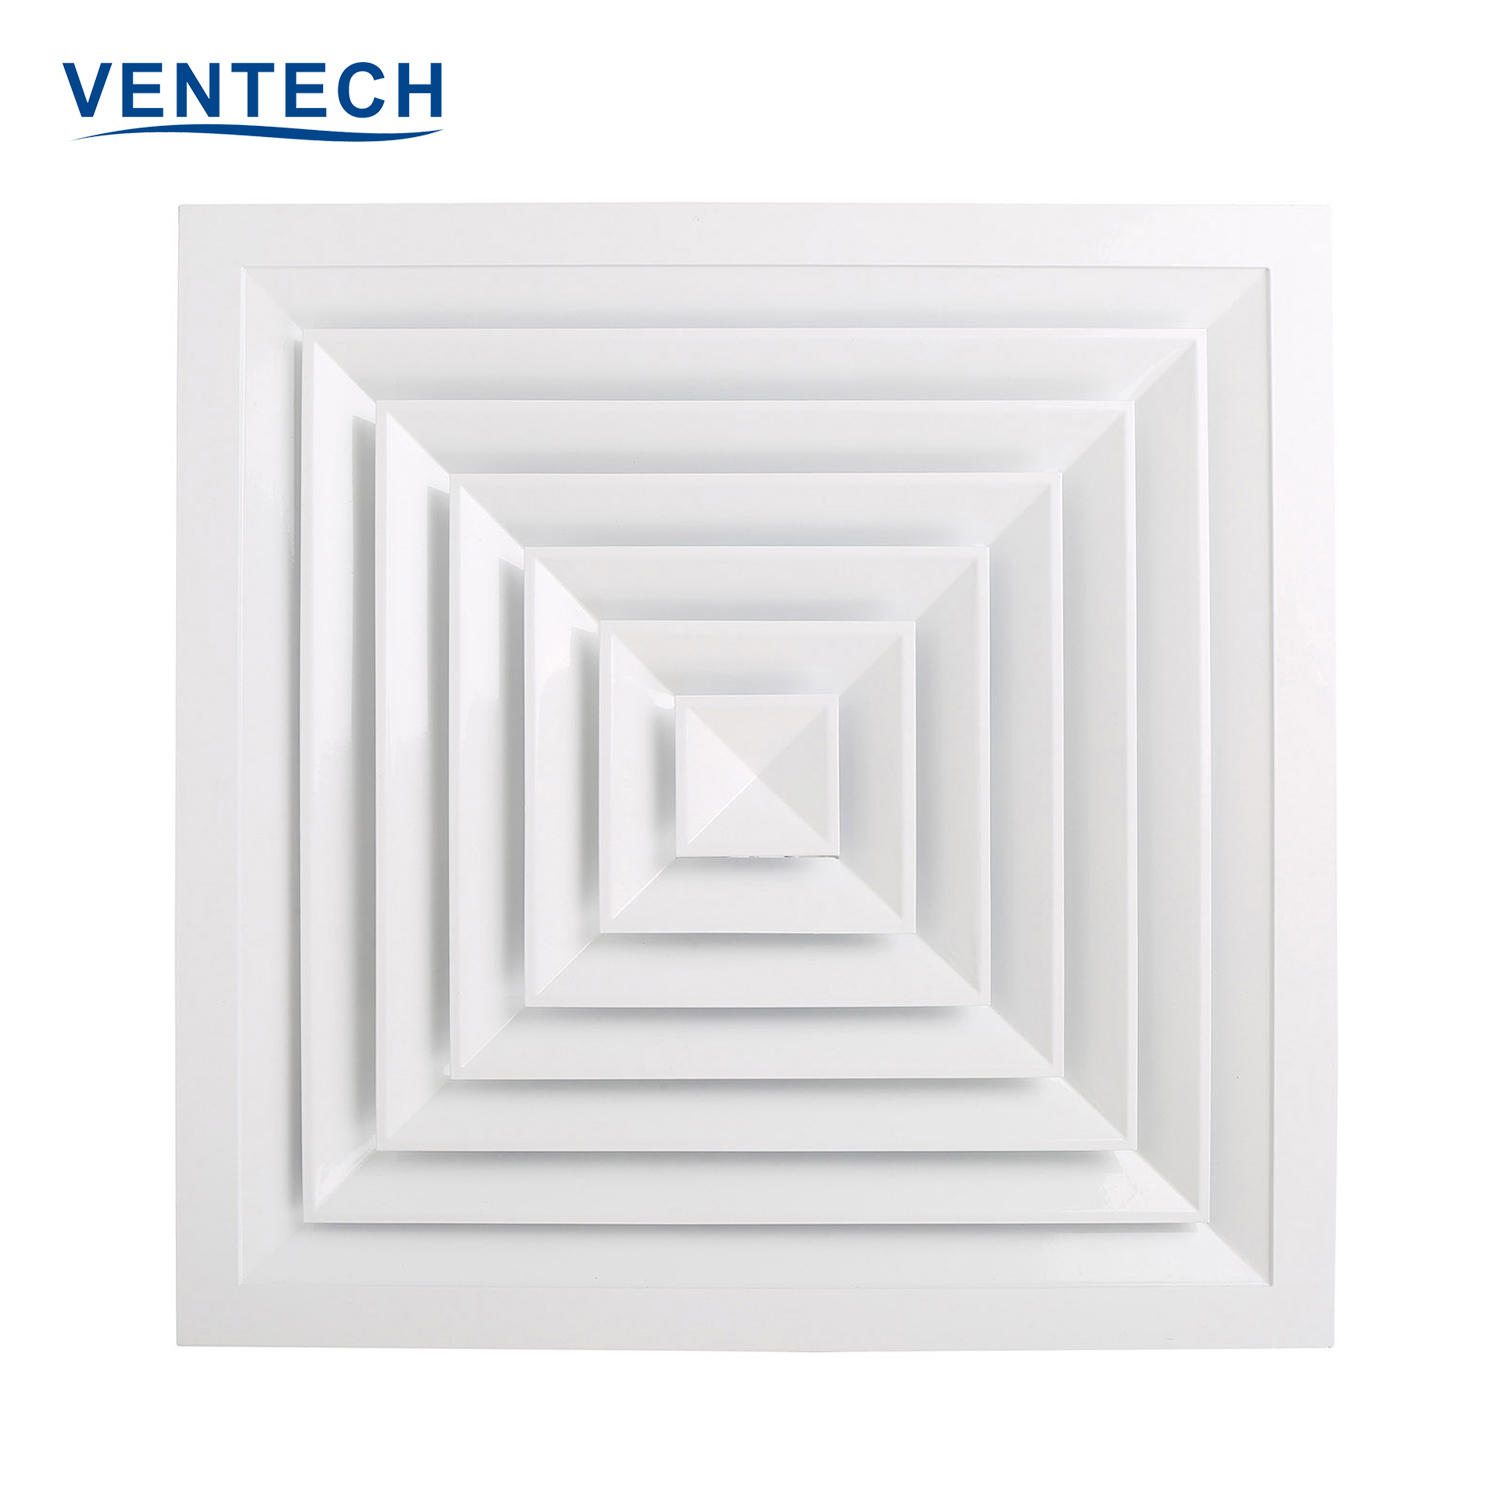 Hvac System VENTECH Exhaust Air Aluminum Conditioning Square Ceiling Air Duct Diffusers